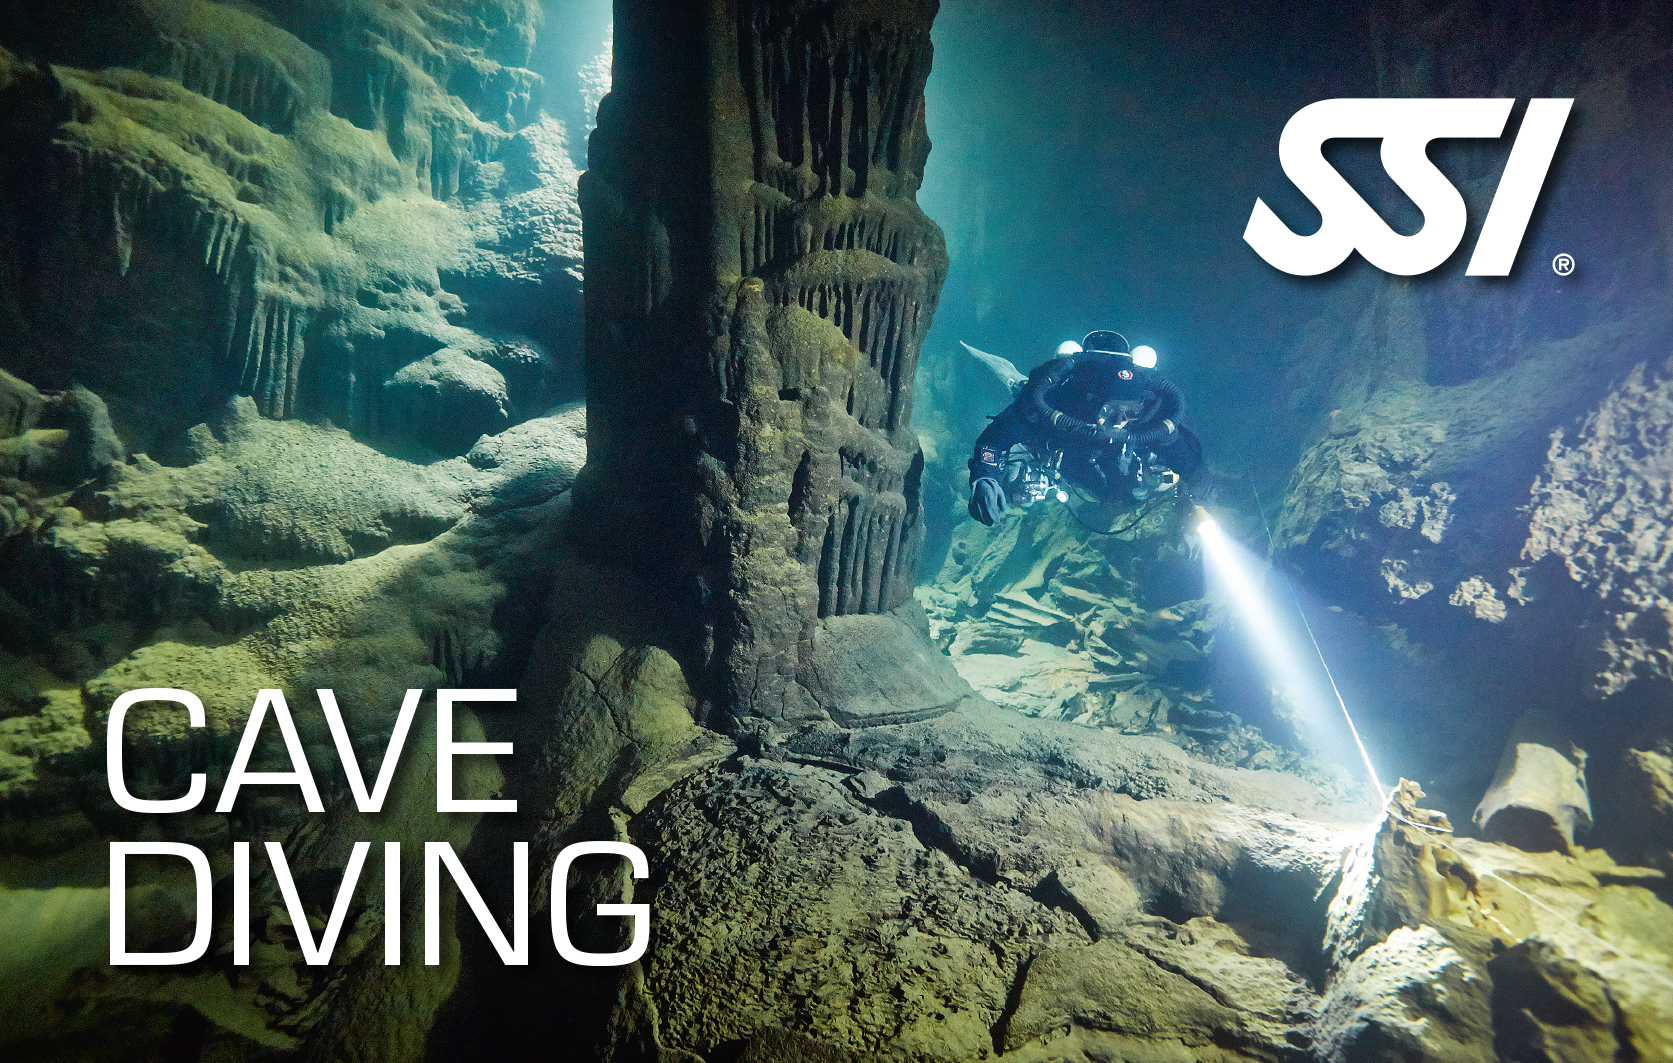 EXTENDED RANGE CAVE Diving SSI